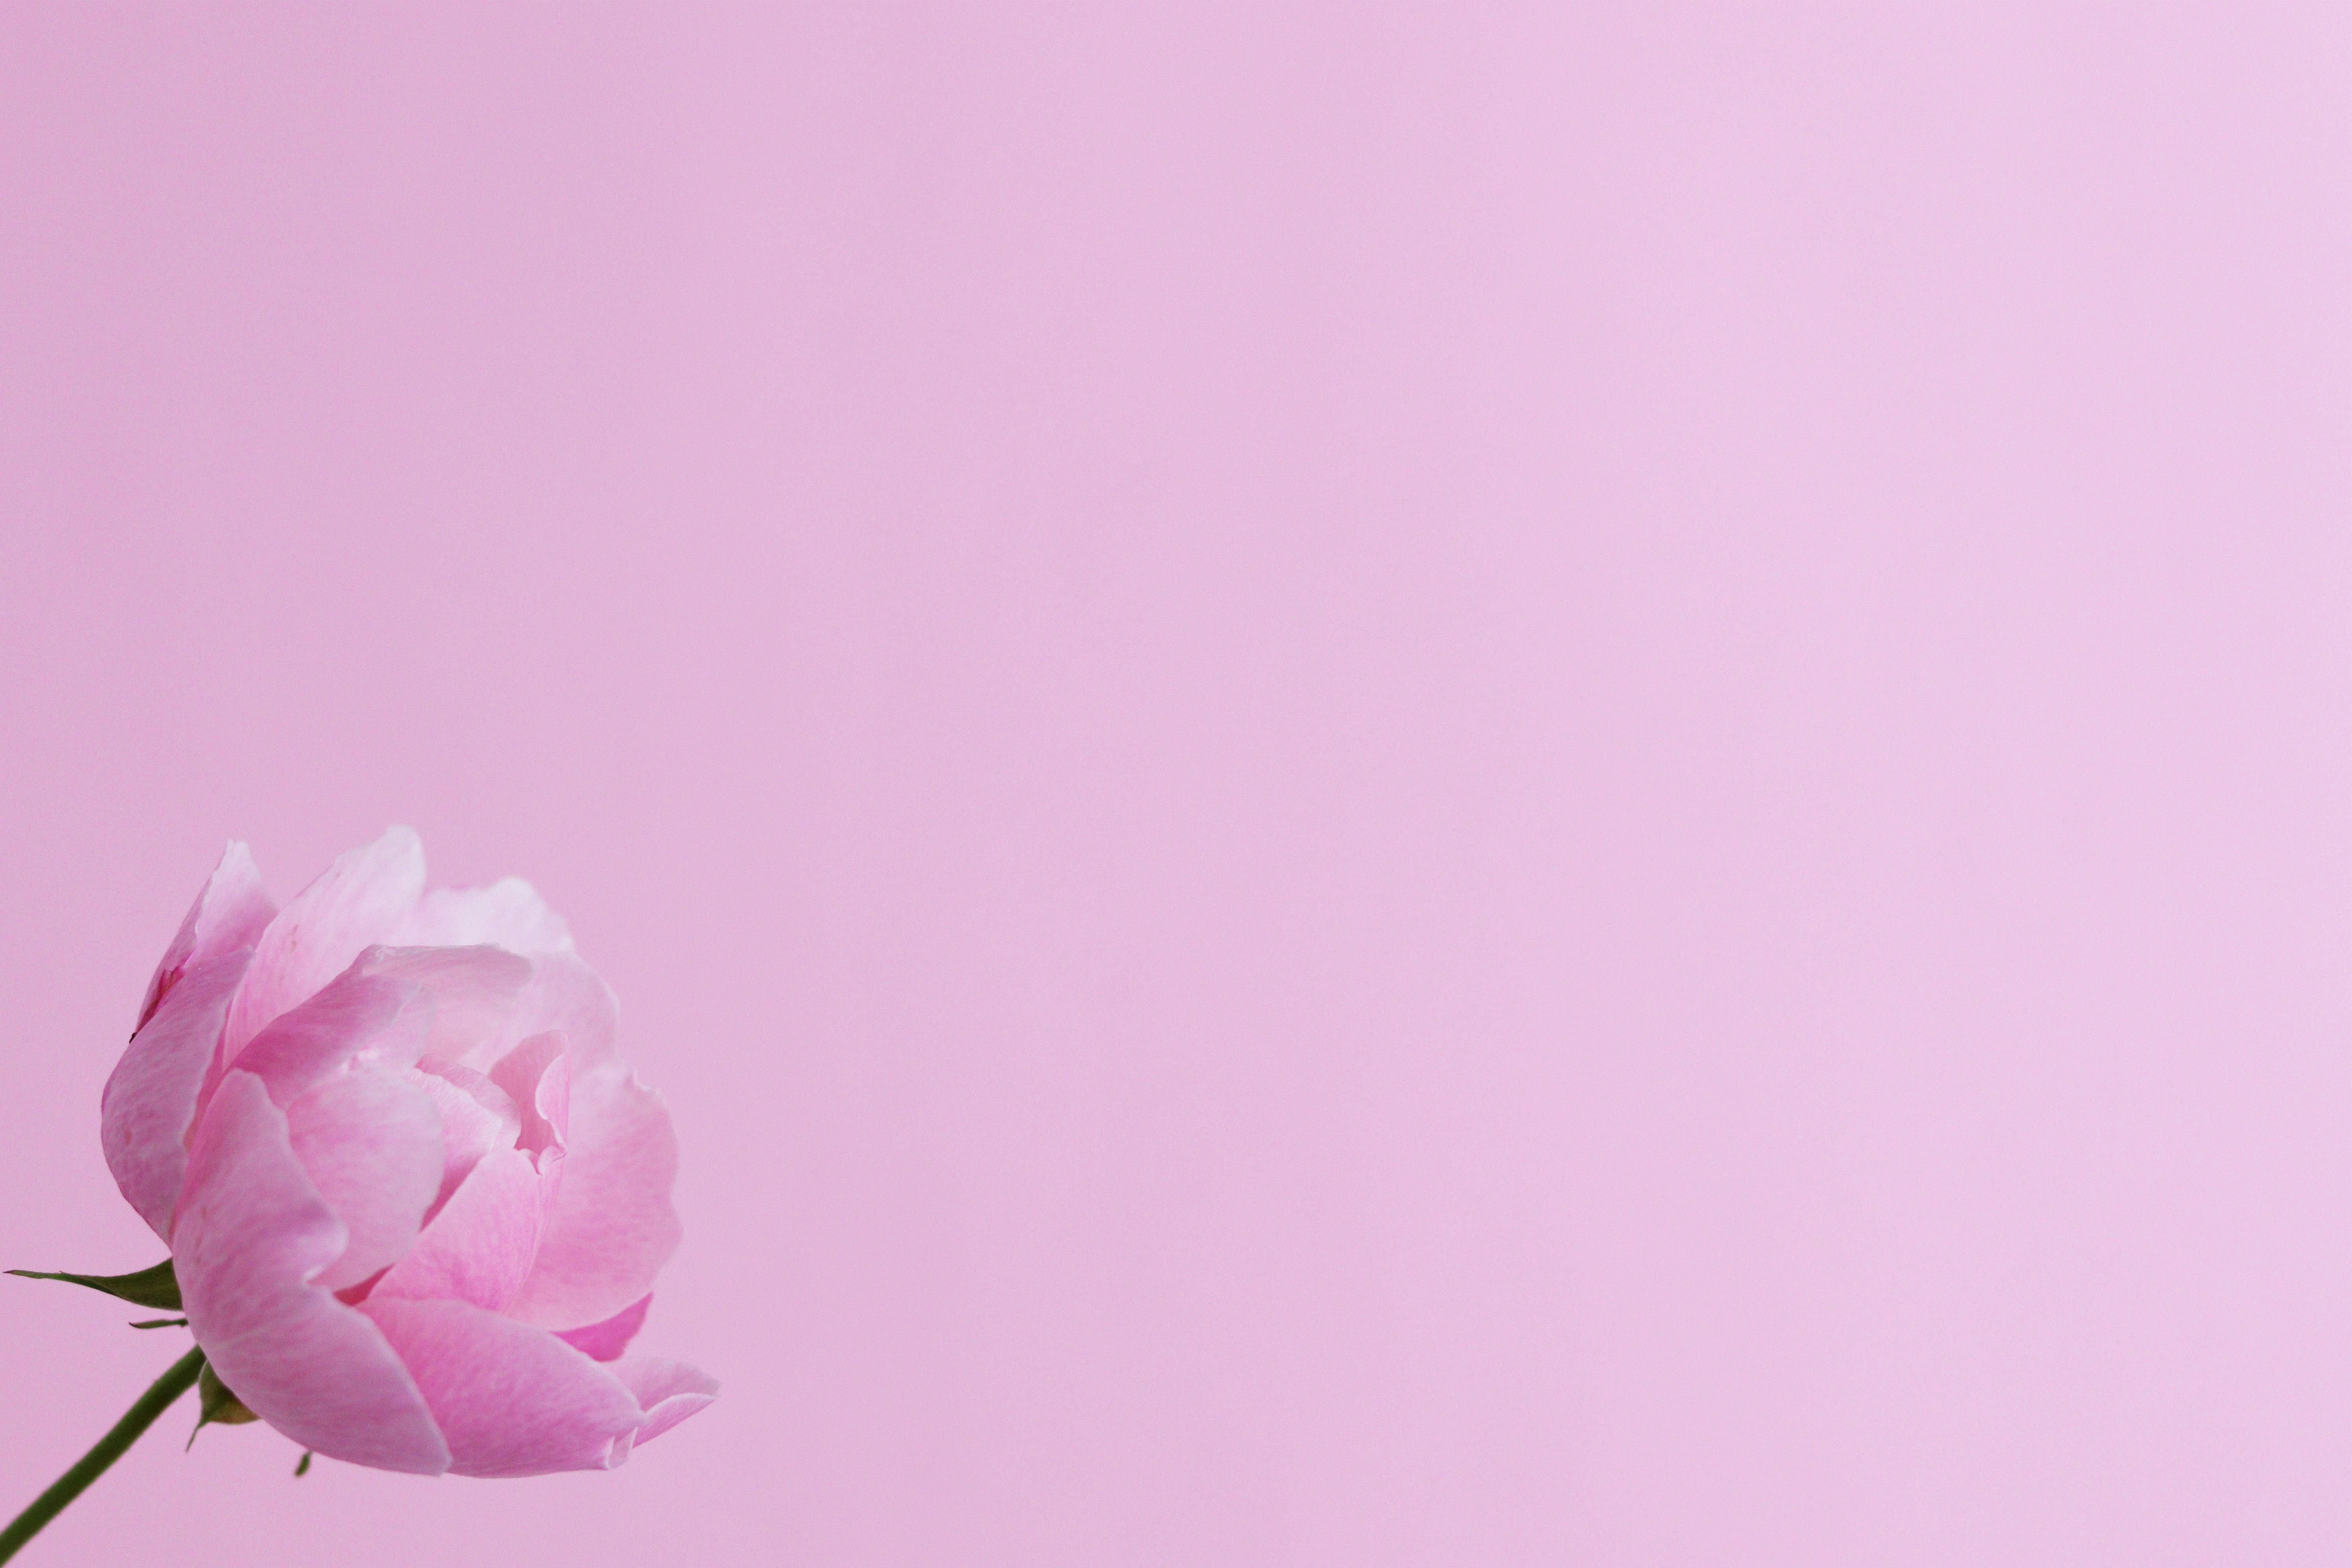 Pink Flower on Pink Background · Free Stock Photo